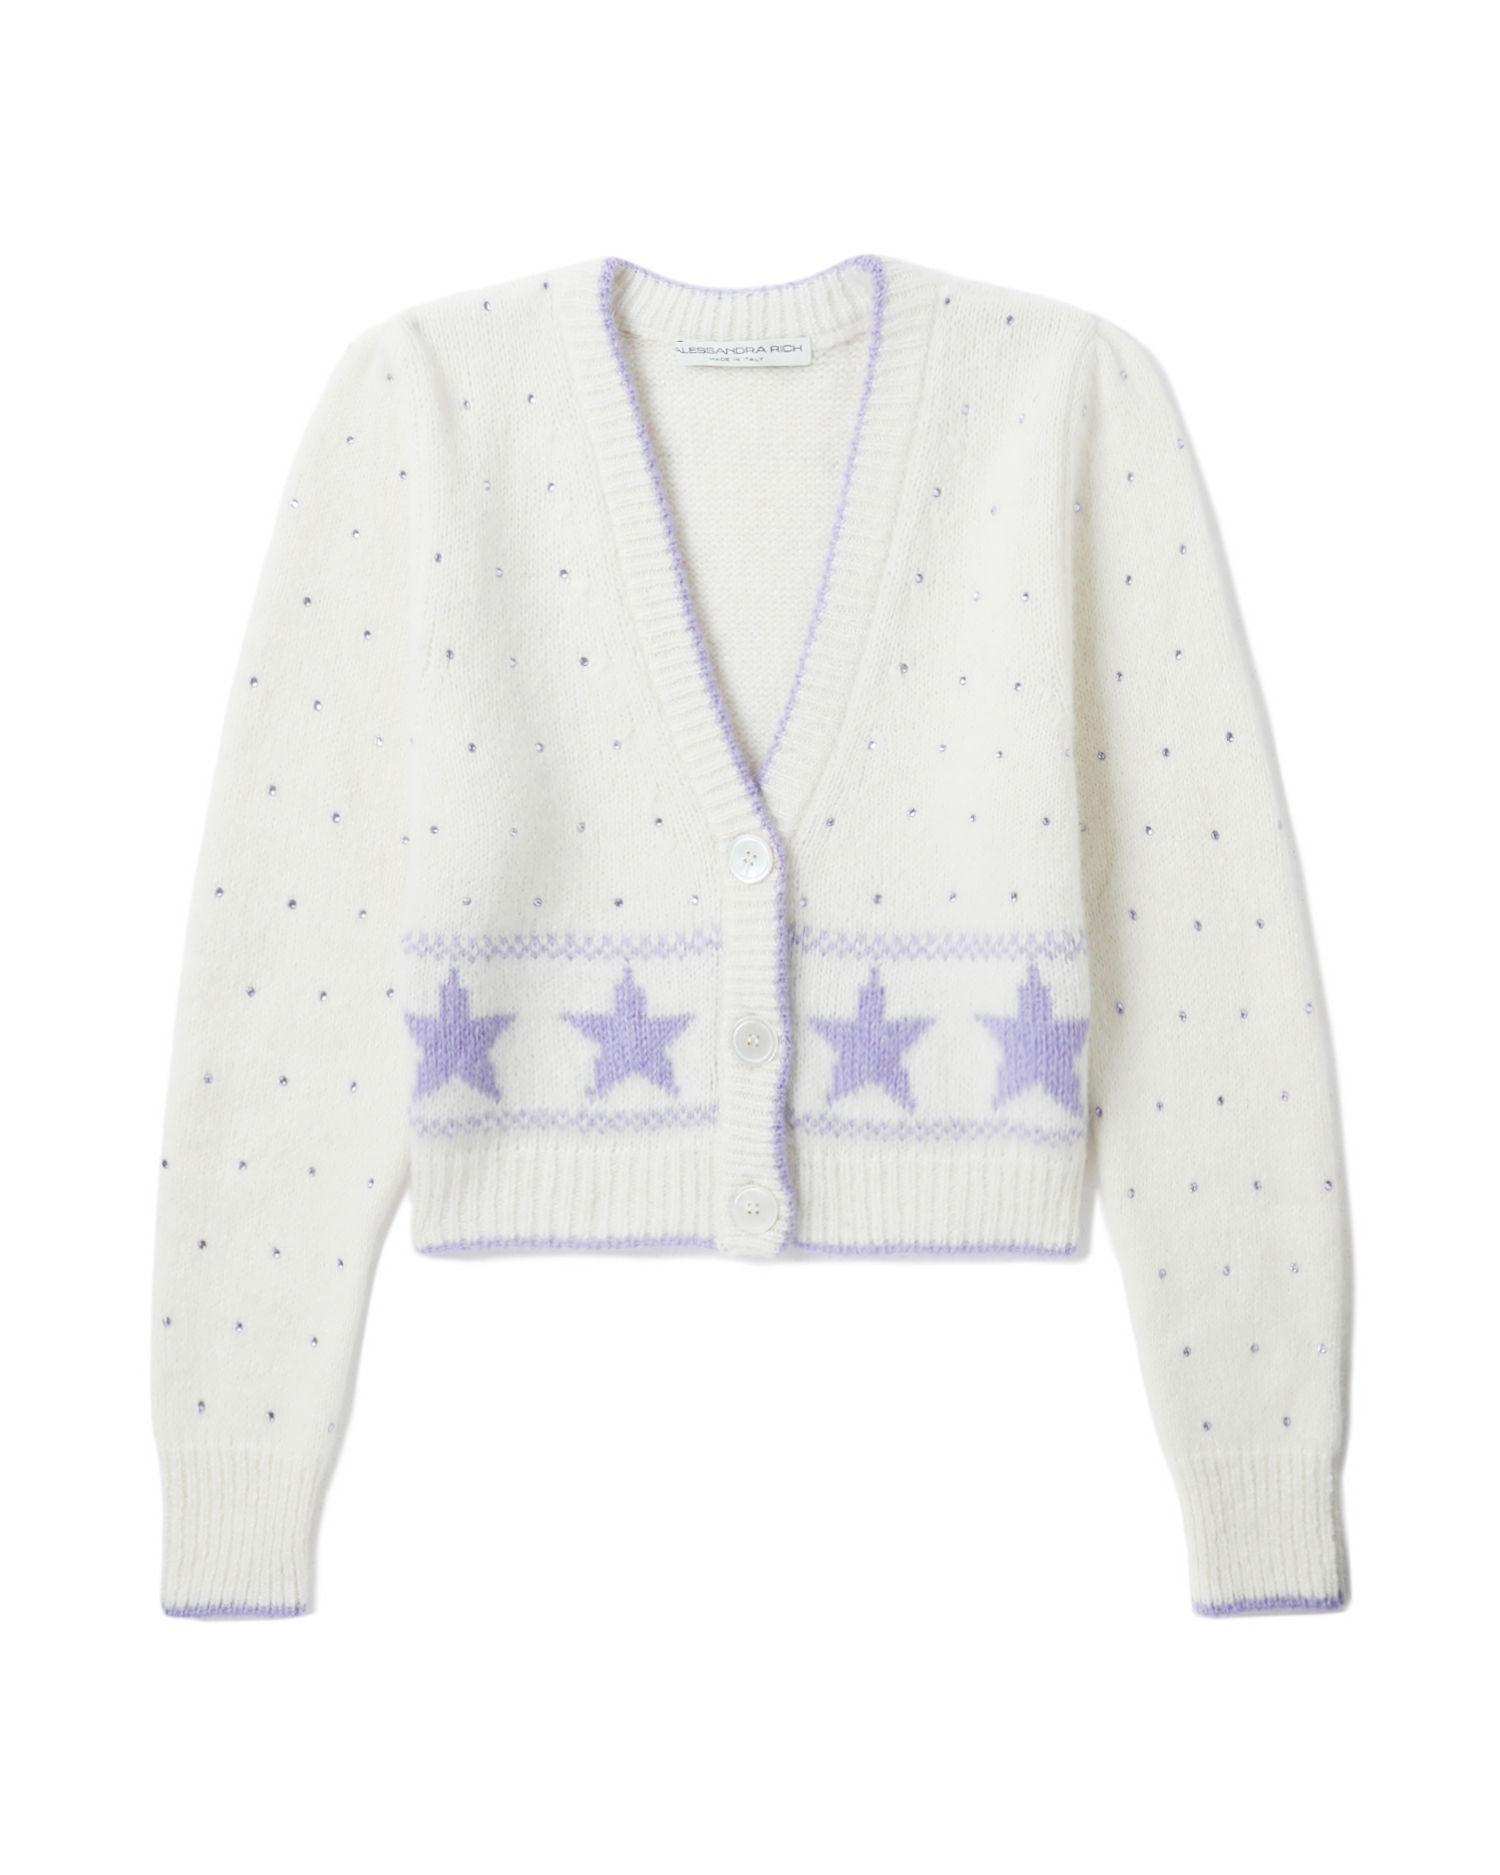 Star jacquard cropped cardigan by ALESSANDRA RICH